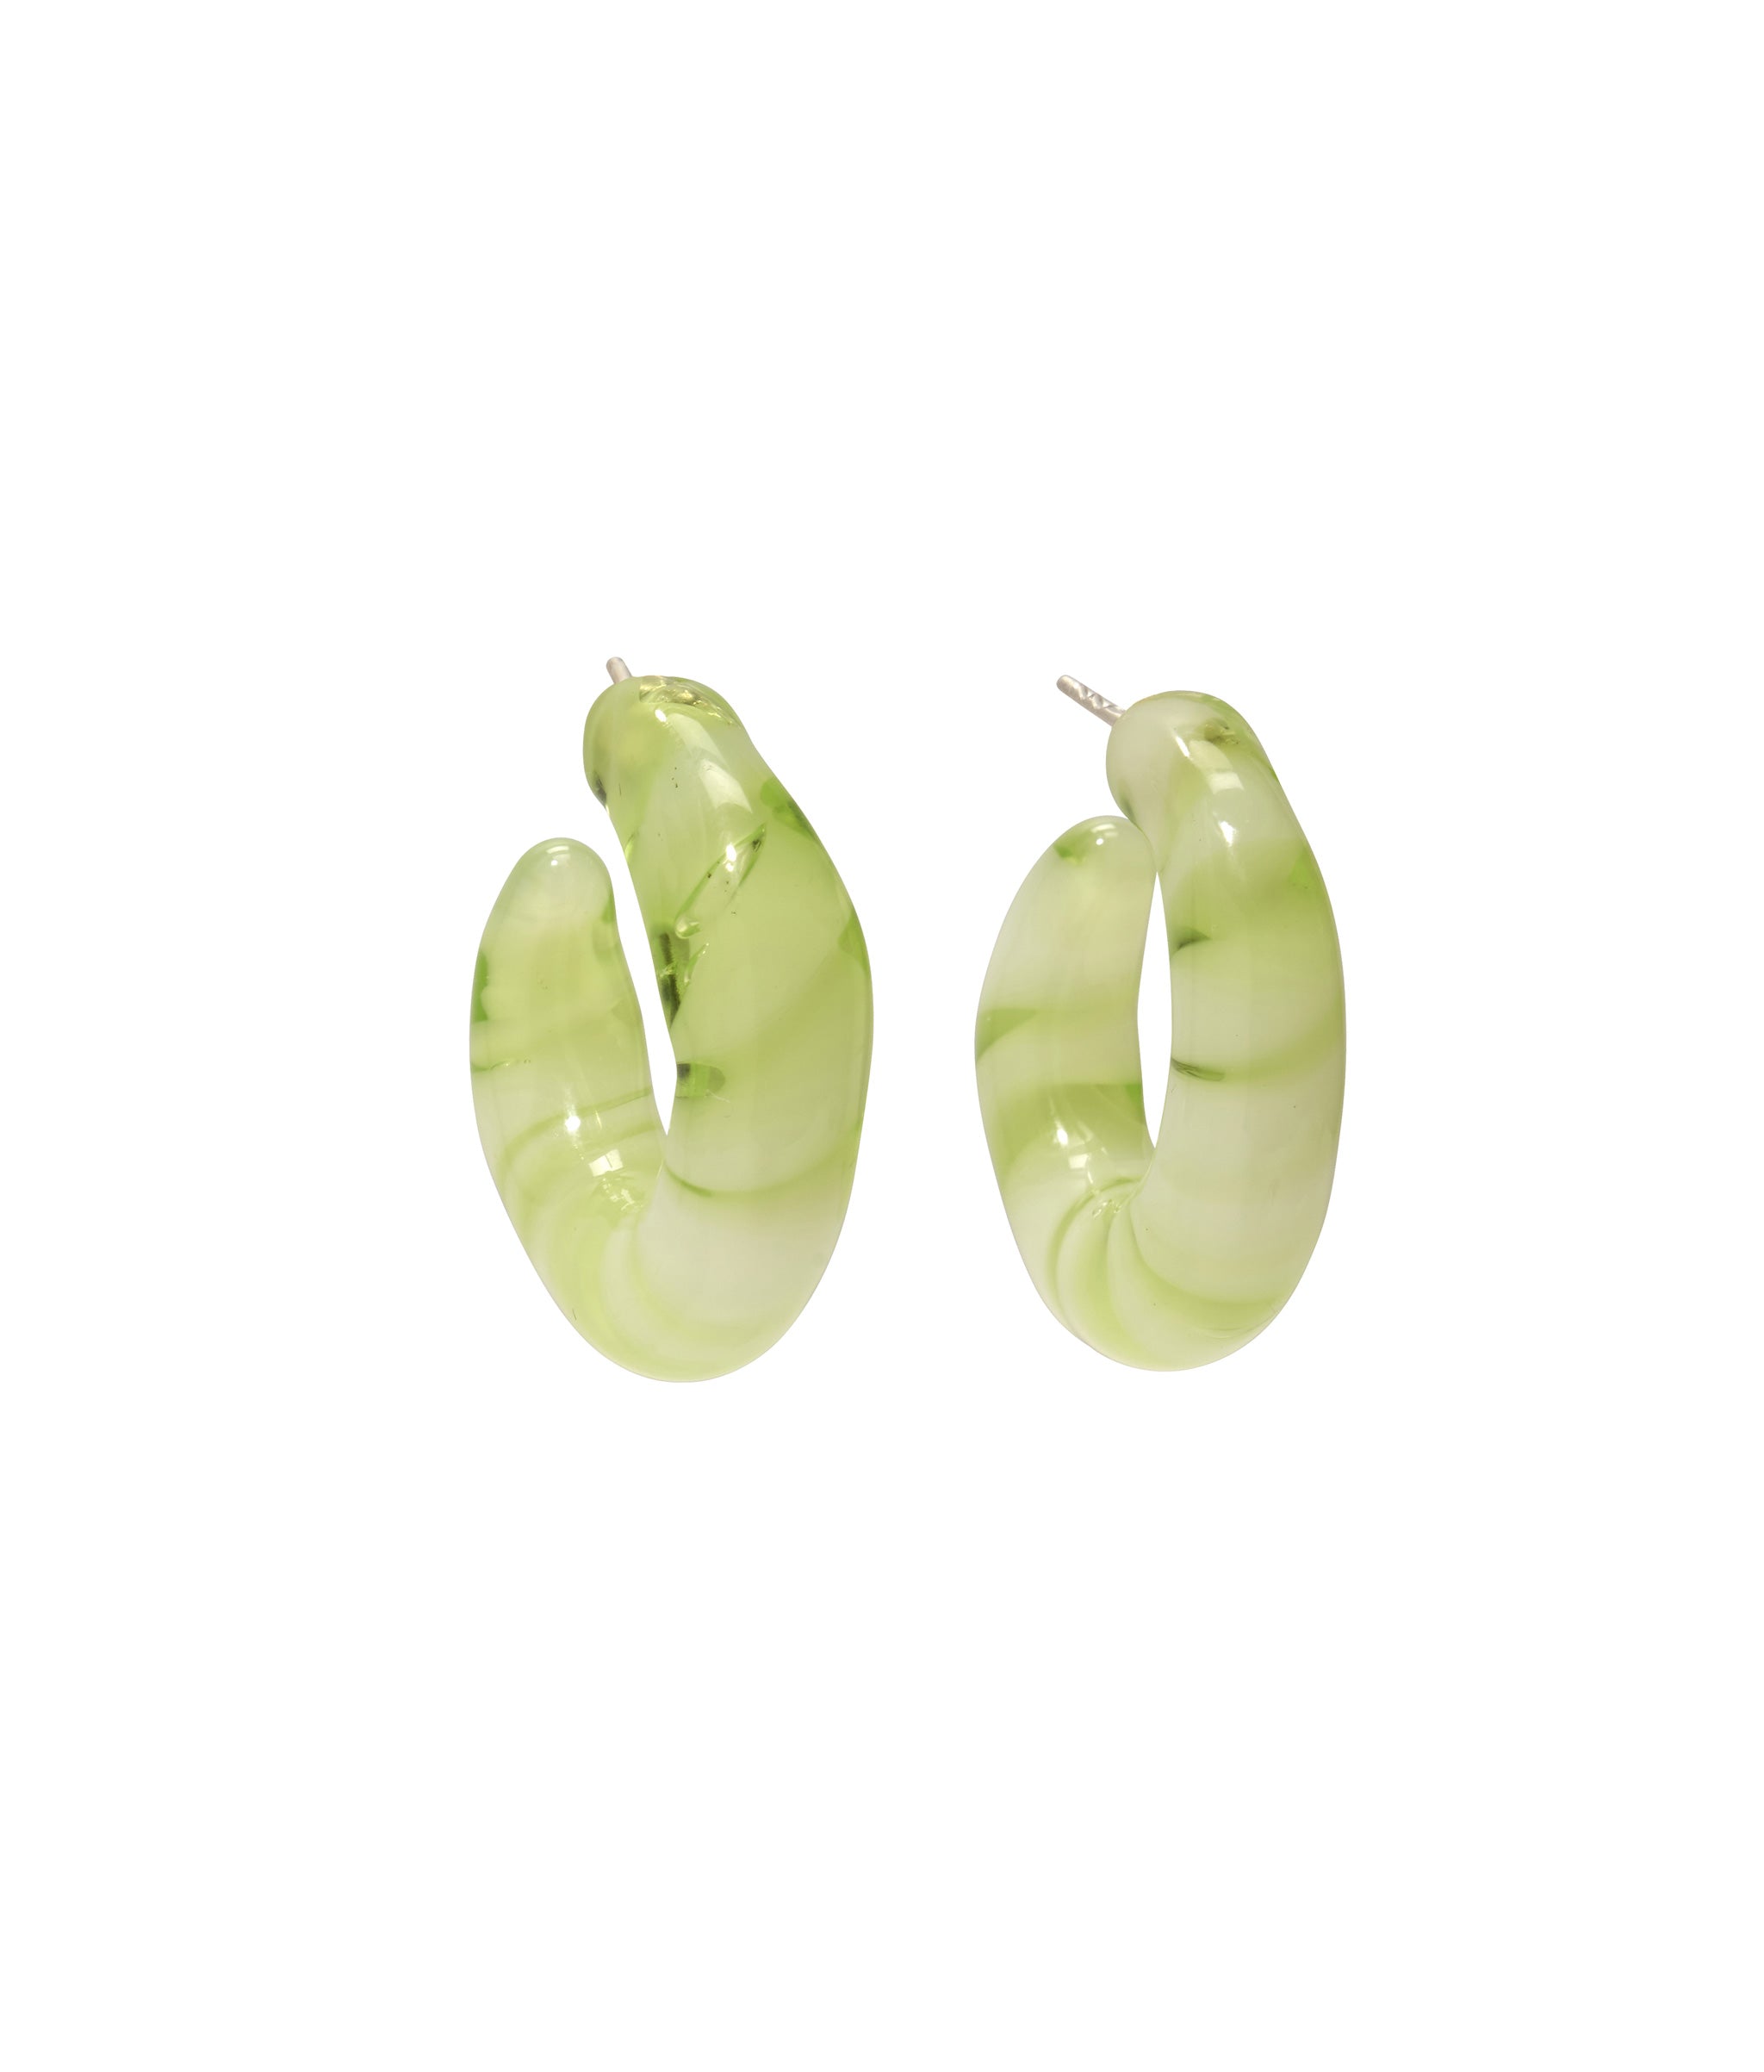 Cascais Hoops in Lime